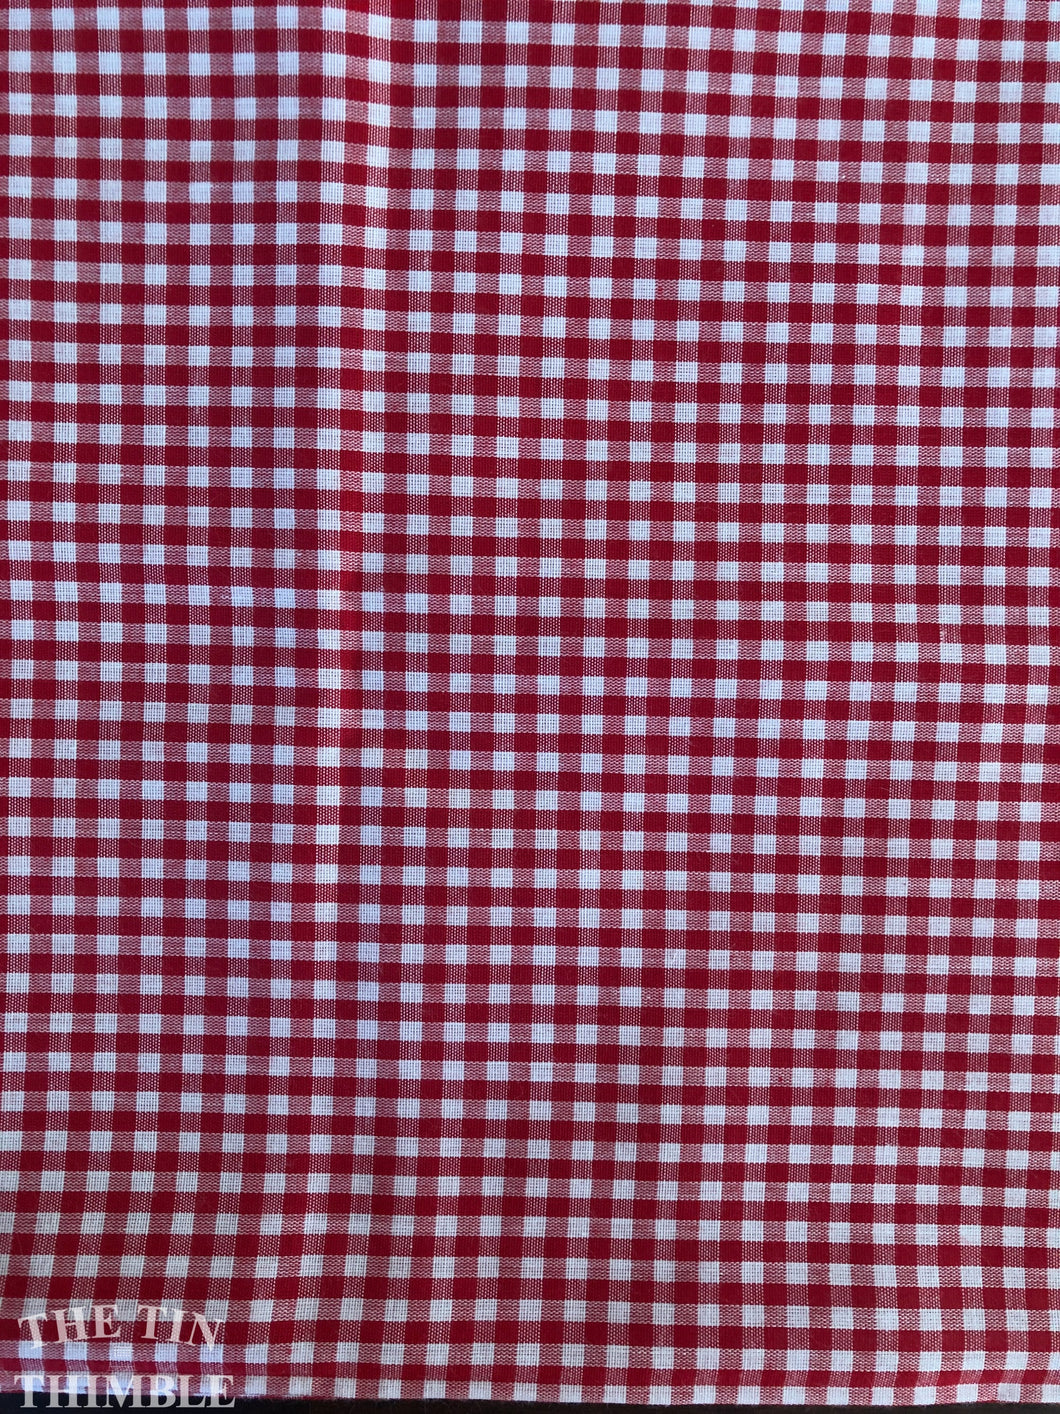 Vintage Red Cotton Gingham Fabric - 7/8 Yard - Cotton/Poly Blend